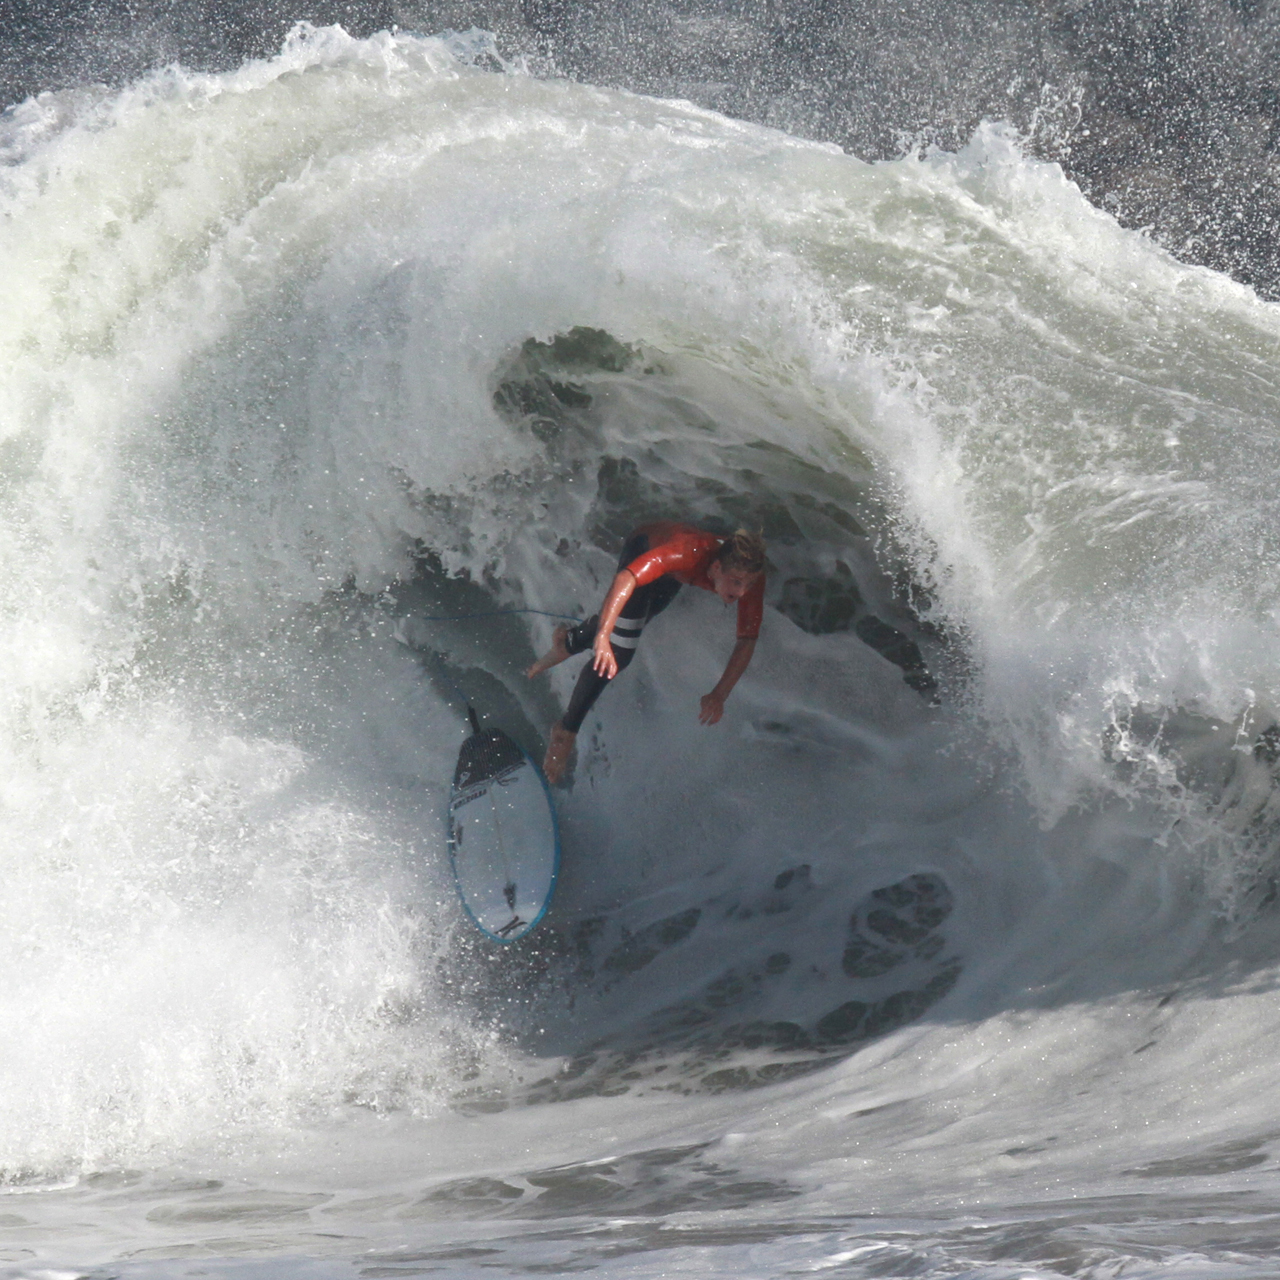 Jordan Collins Shreds The Wedge and Gets Gobbled | Hurricane Marie, August 27th, 2014